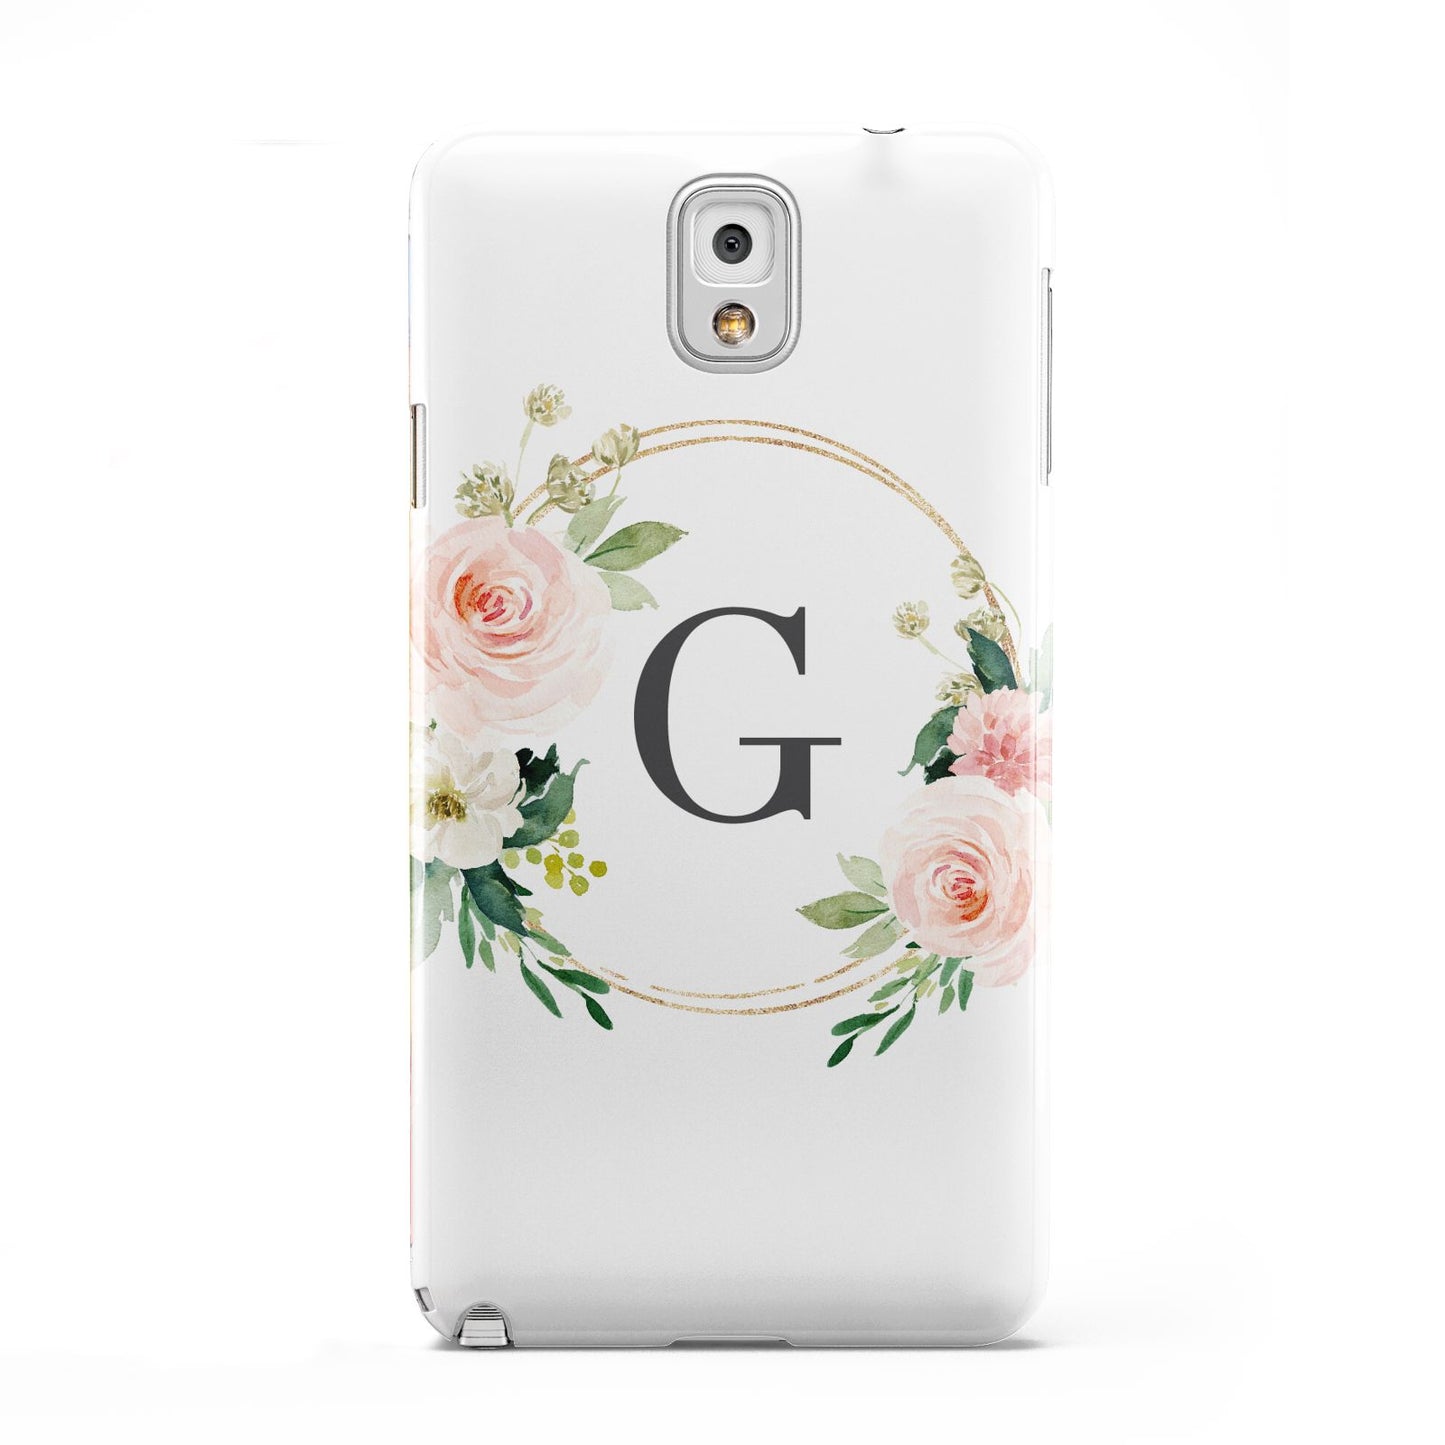 Personalised Blush Floral Wreath Samsung Galaxy Note 3 Case